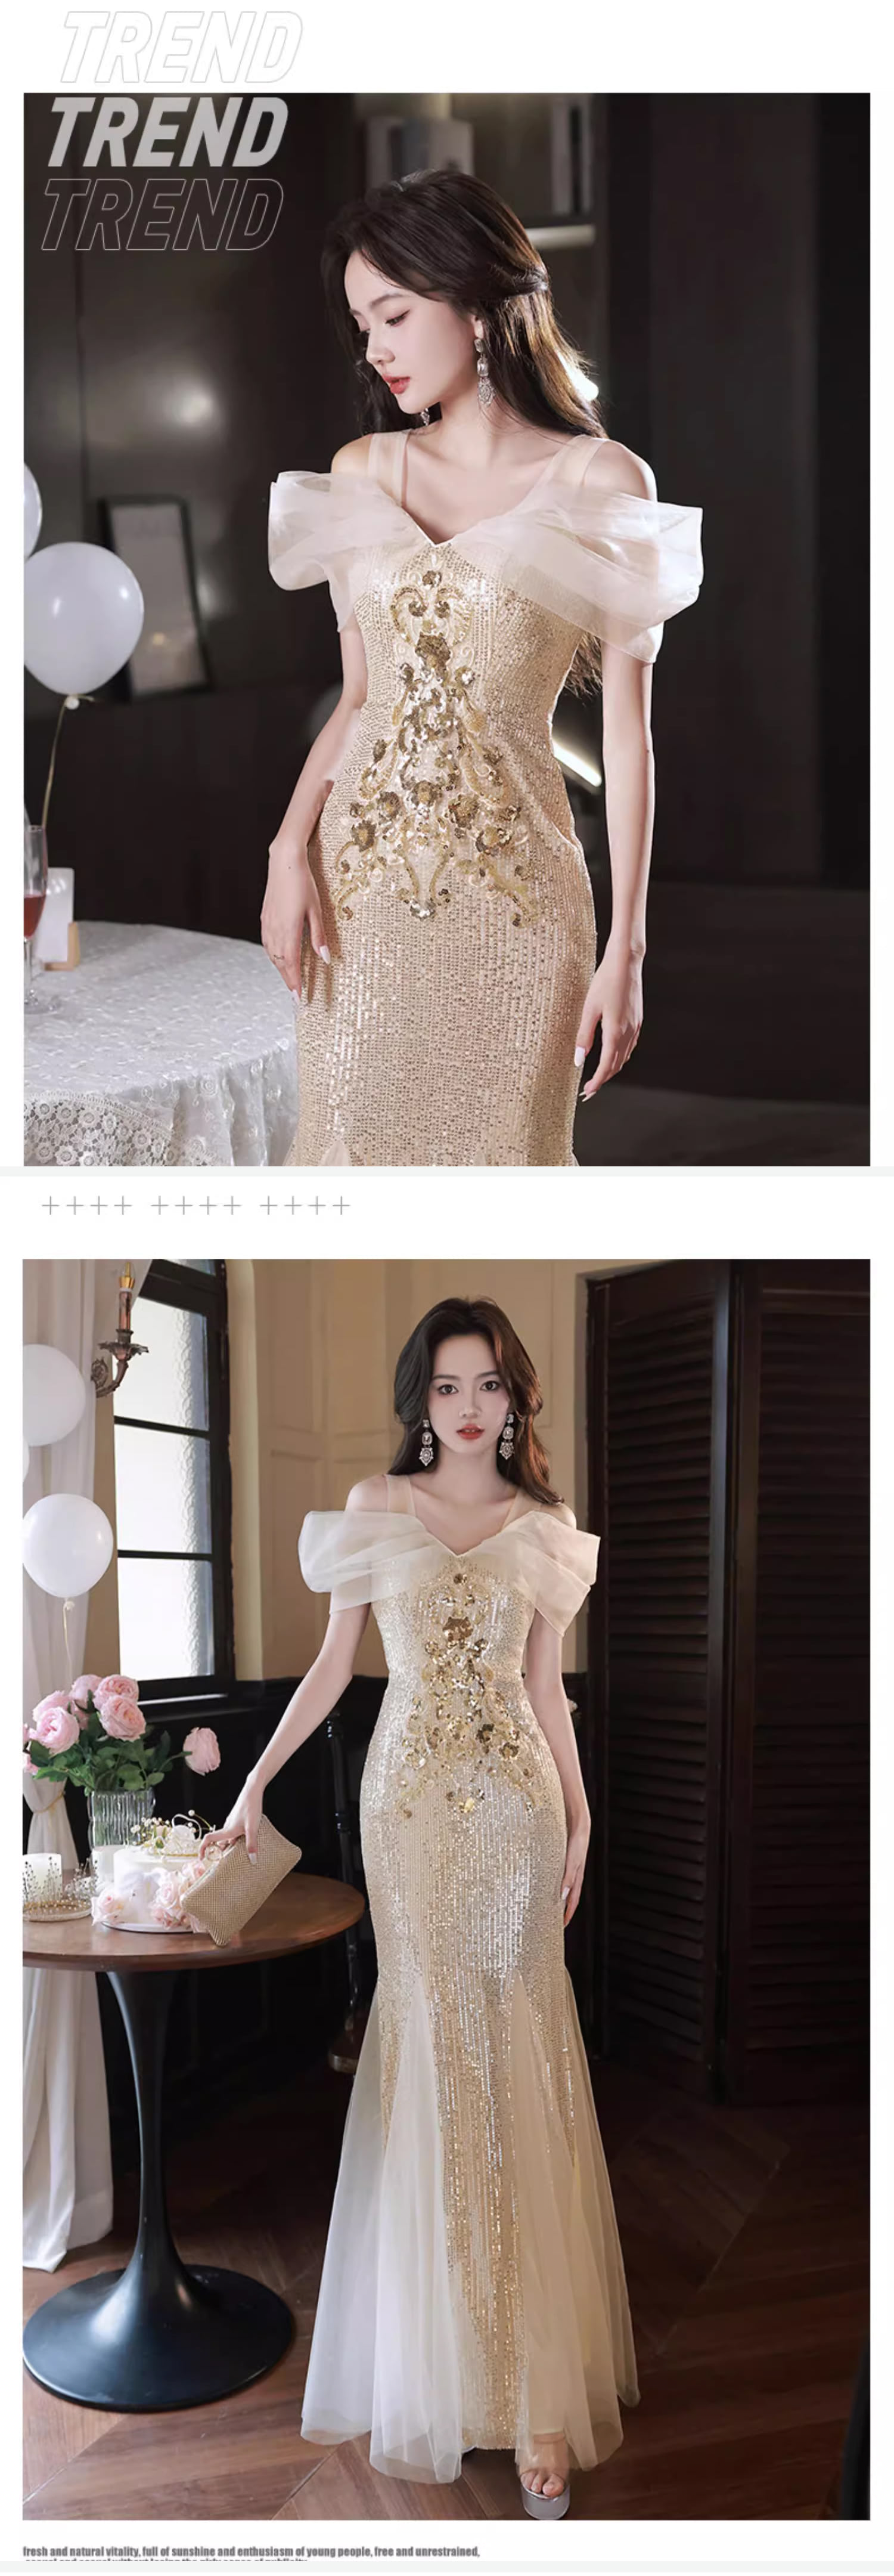 Luxury-Off-the-Shoulder-Sequin-Formal-Dress-Sparkly-Evening-Gown10